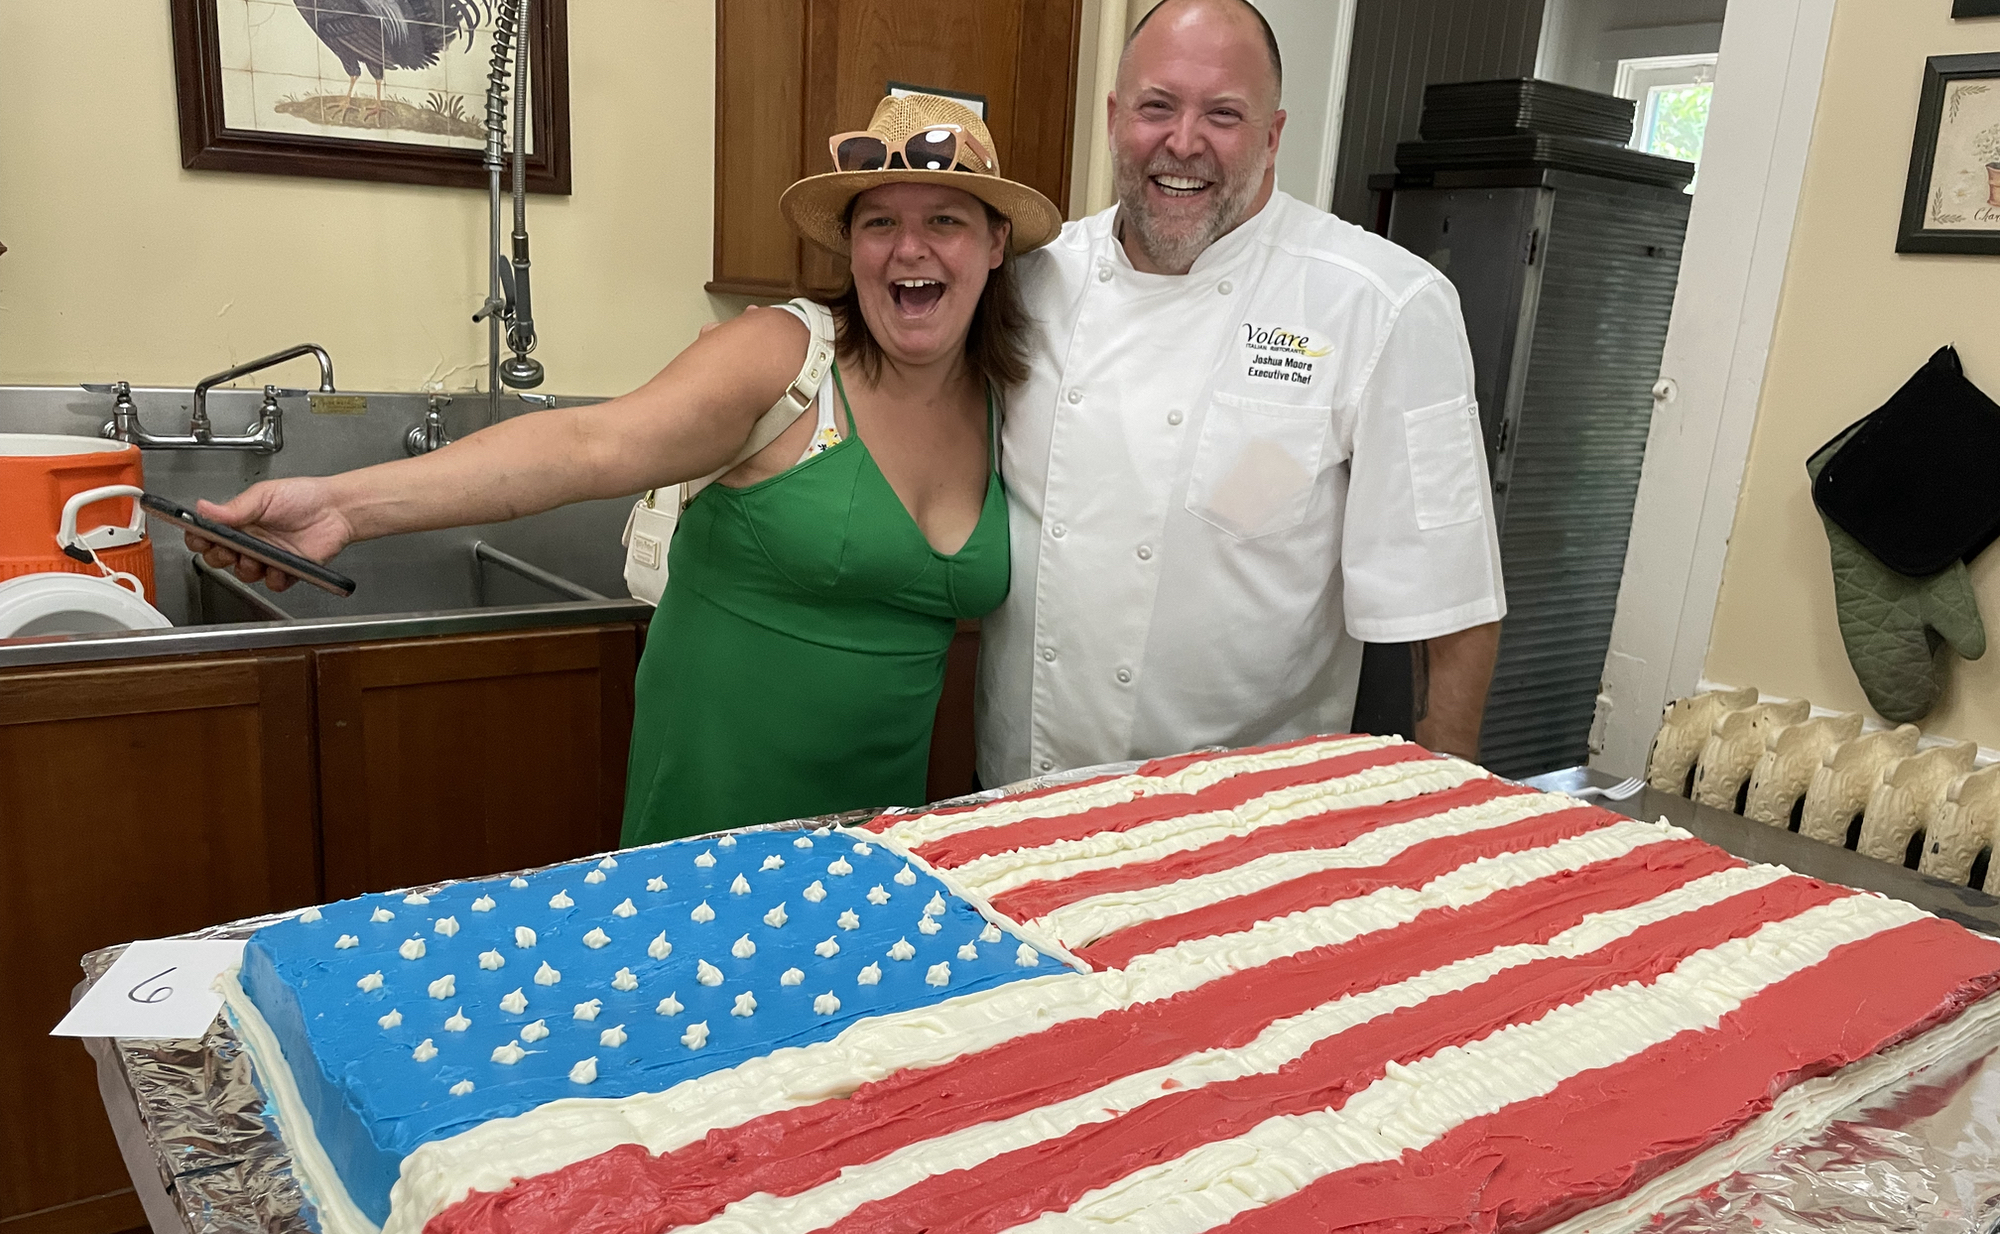 Crescent Hill Old Fashioned Fourth of July Cake Judges Caity DiFabio and Joshua Moore look hungrily at Squish Schmidt's American Flag cake, a giant creation that won the Unicorn award for most patriotic entry.